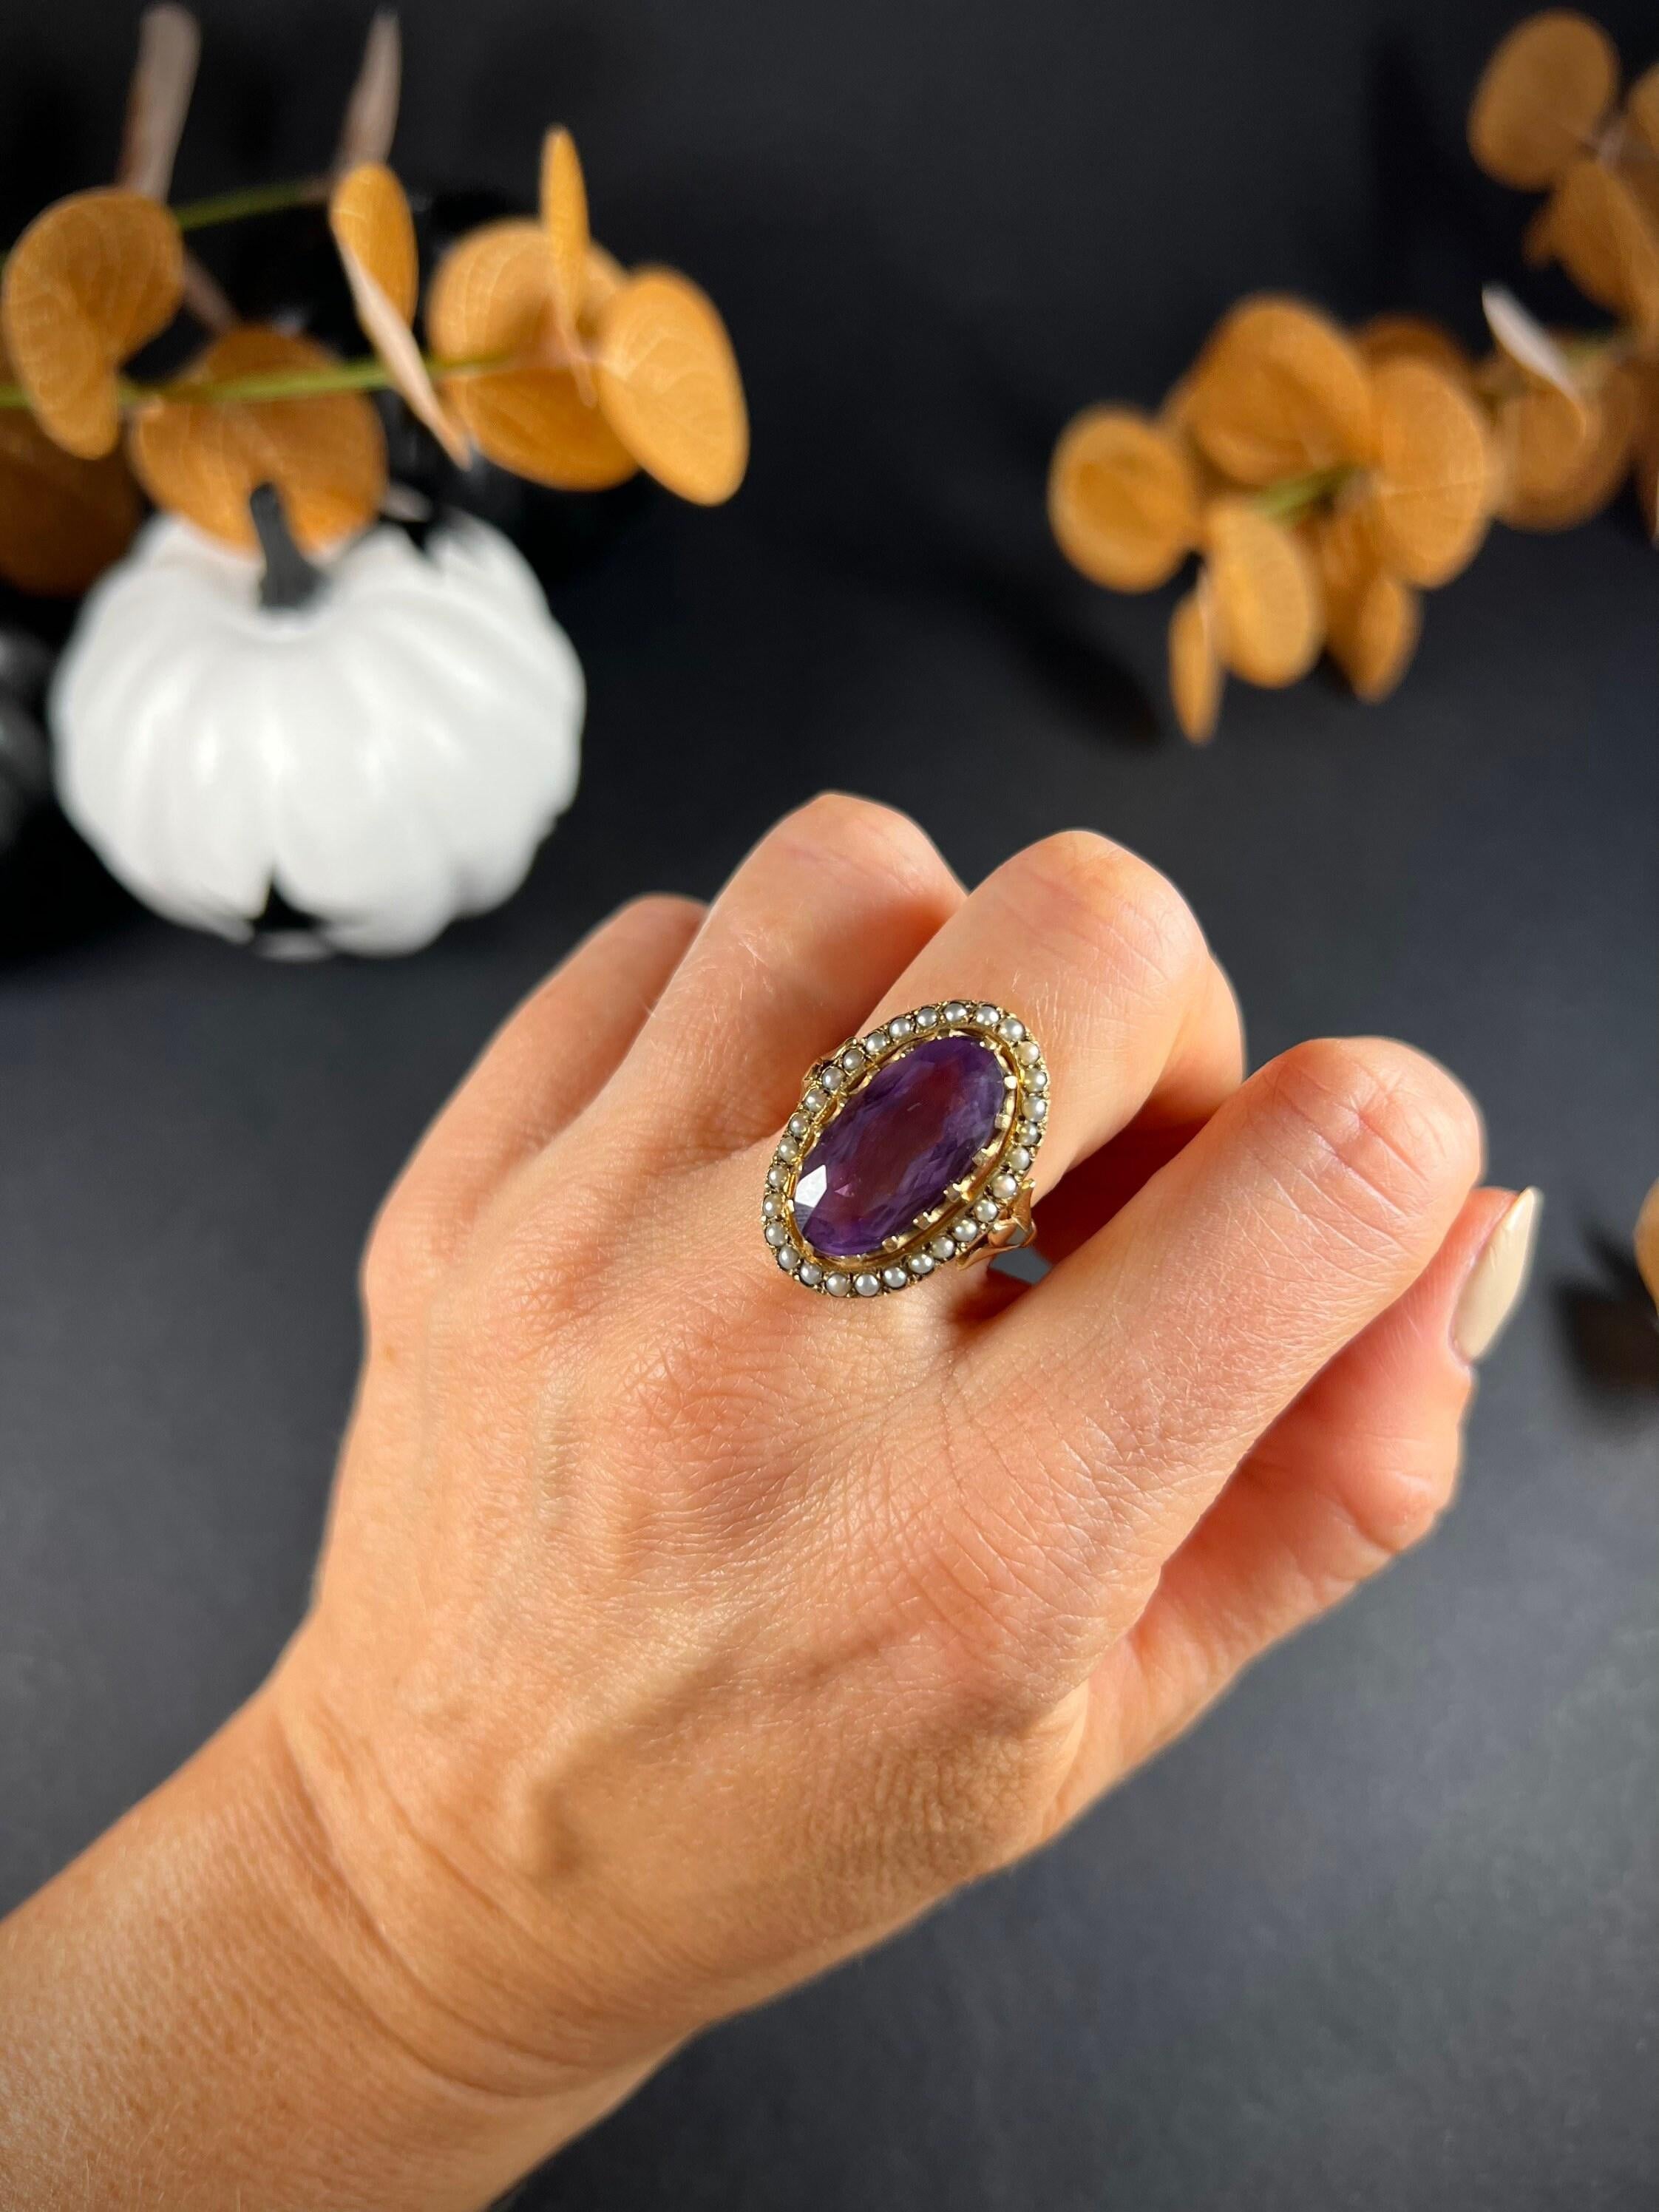 Vintage Amethyst Ring

9ct Gold Stamped

Circa 1940’s

Fabulous sized, vintage cocktail ring. Set with a large, oval, faceted amethyst & a border of beautiful, milky seed pearls. Mounted on a fancy shouldered, yellow gold shank. 

Measures approx